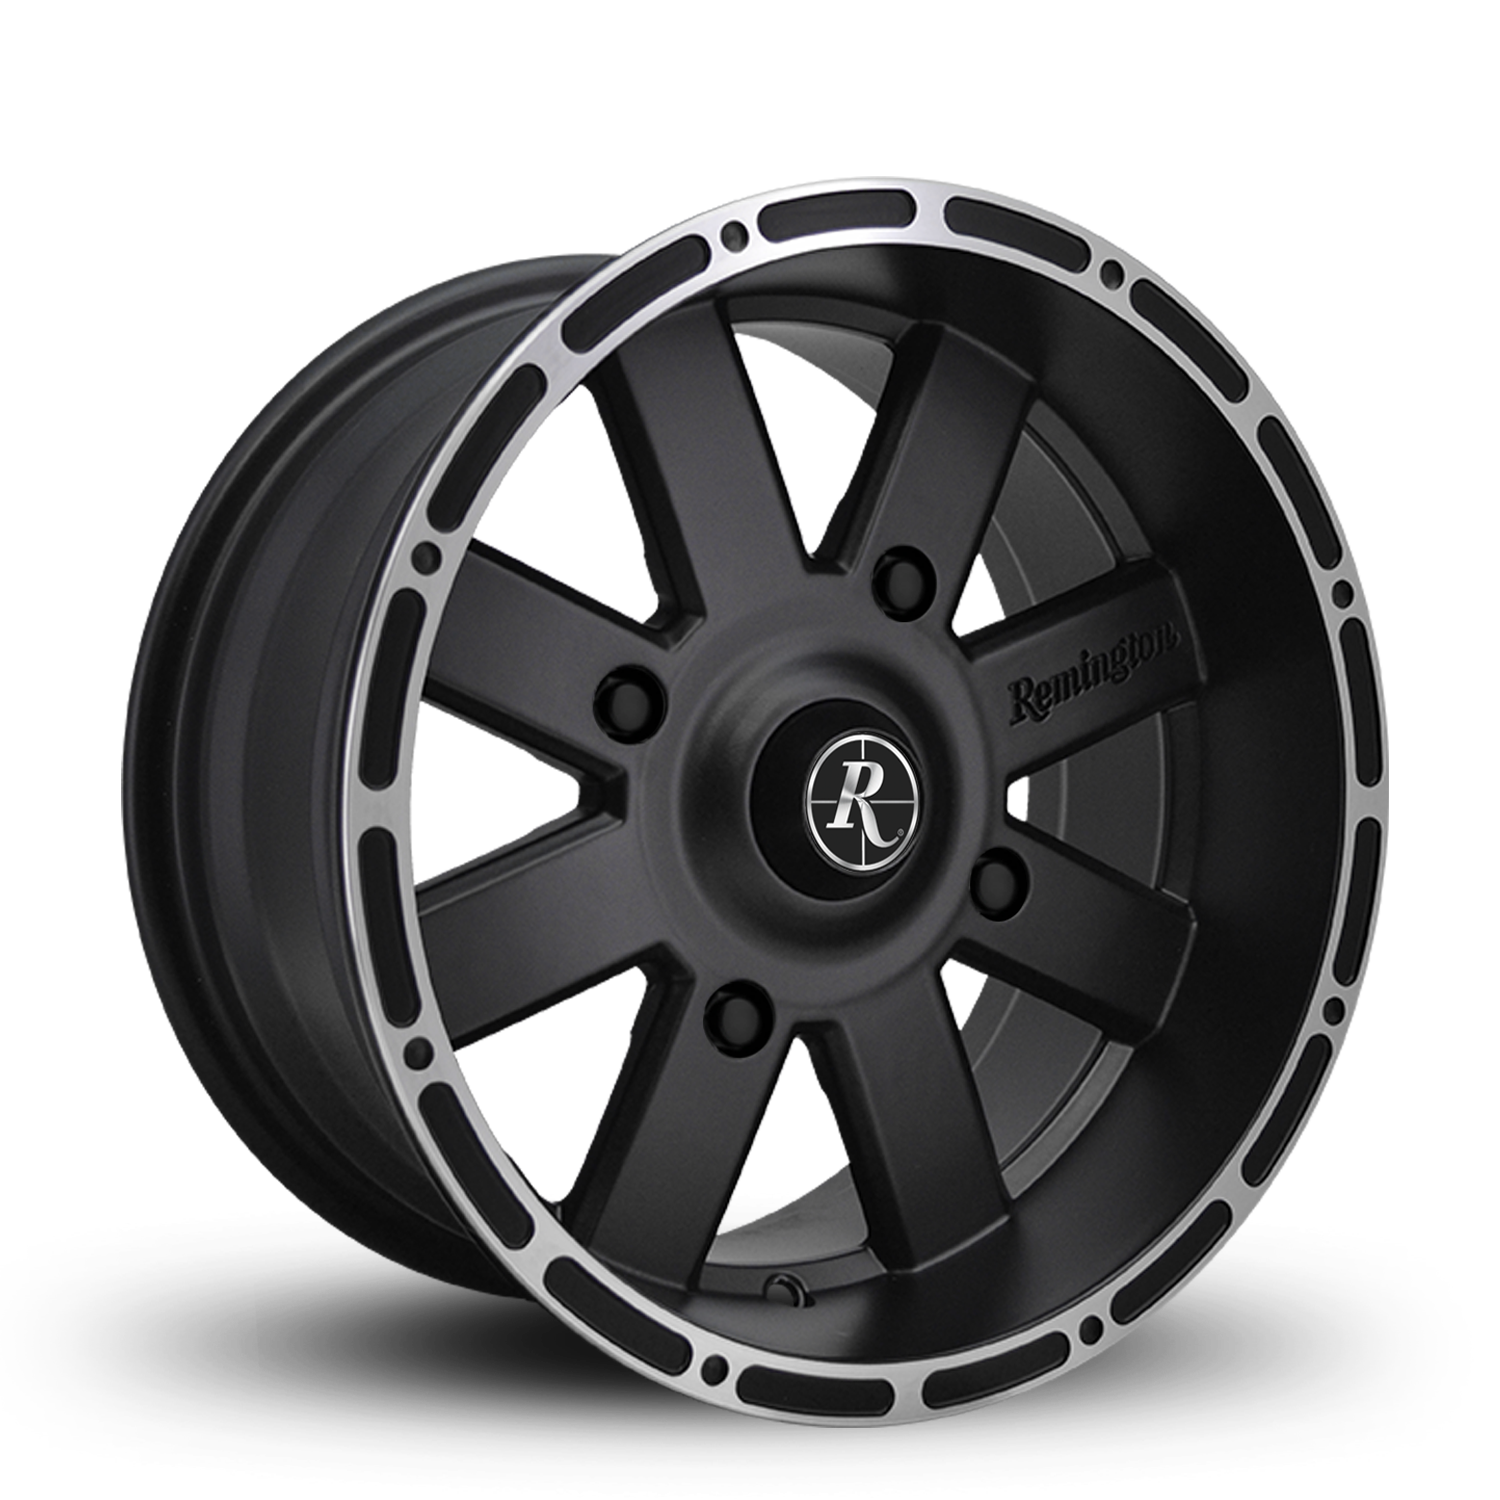 Buy Replacement Center Caps for the HD Golf Wheels Canyon